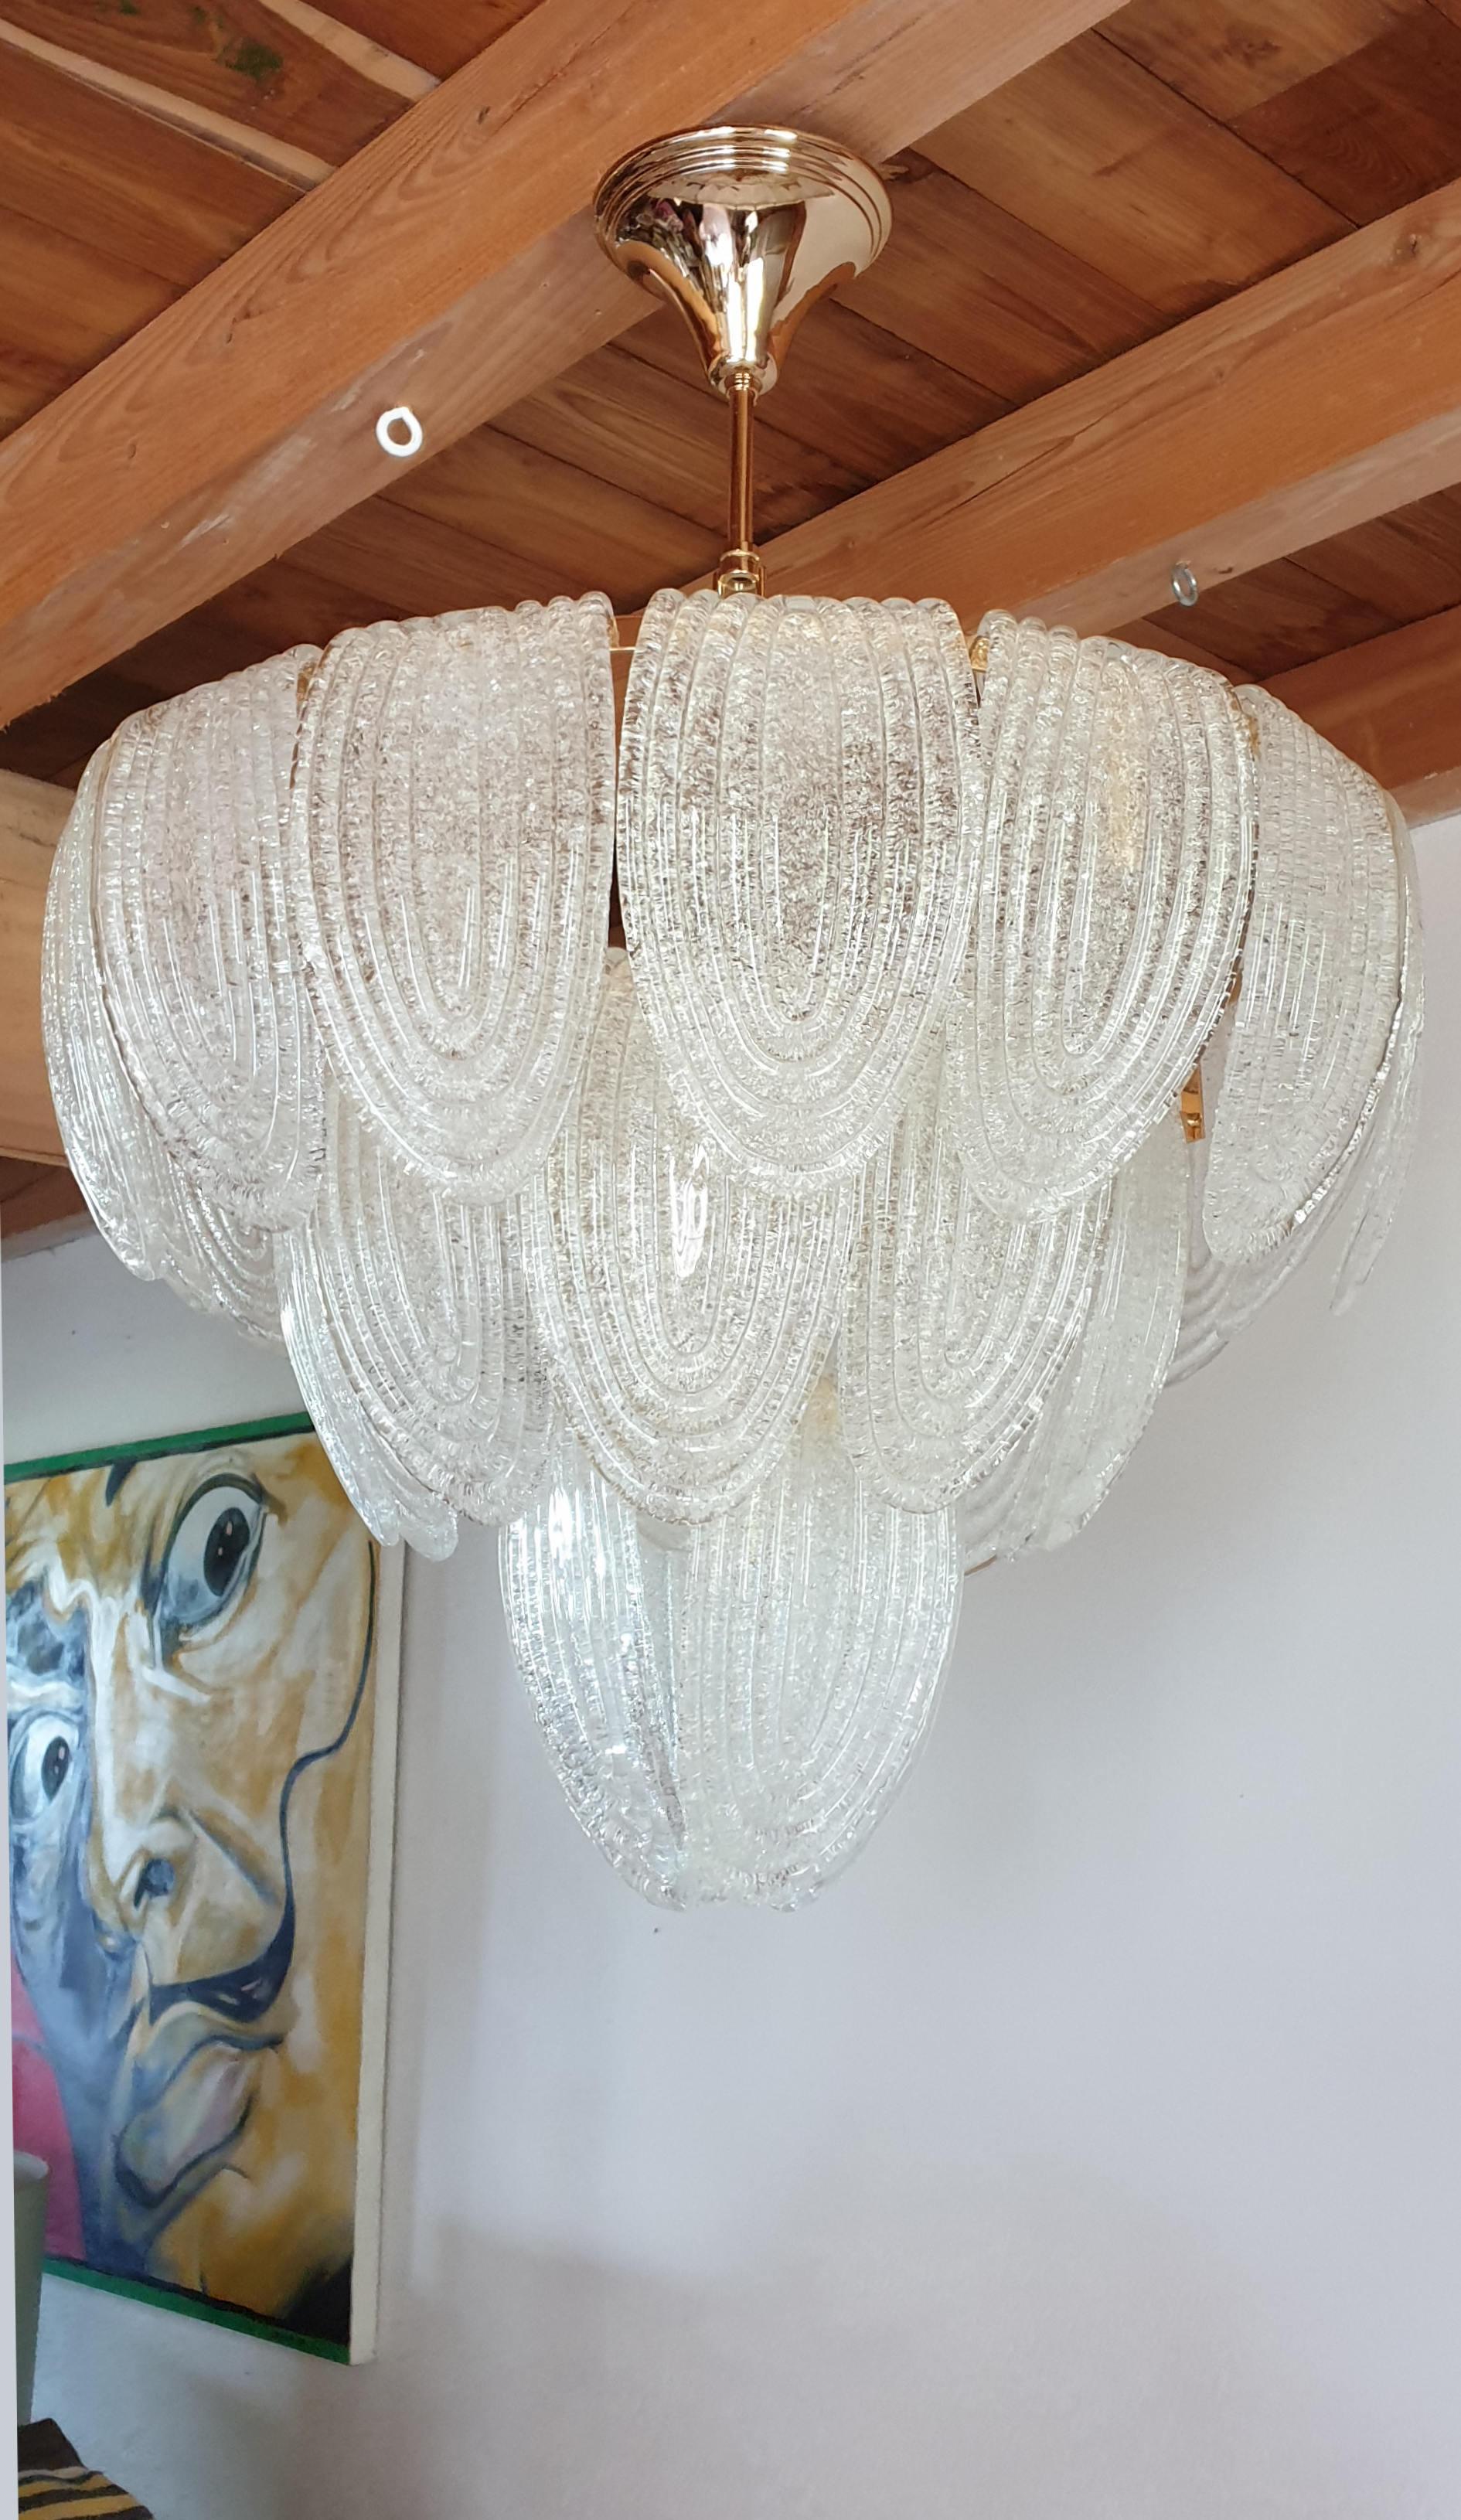 Late 20th Century Mid-Century Modern Murano Glass and Plated Gold Chandelier by Mazzega